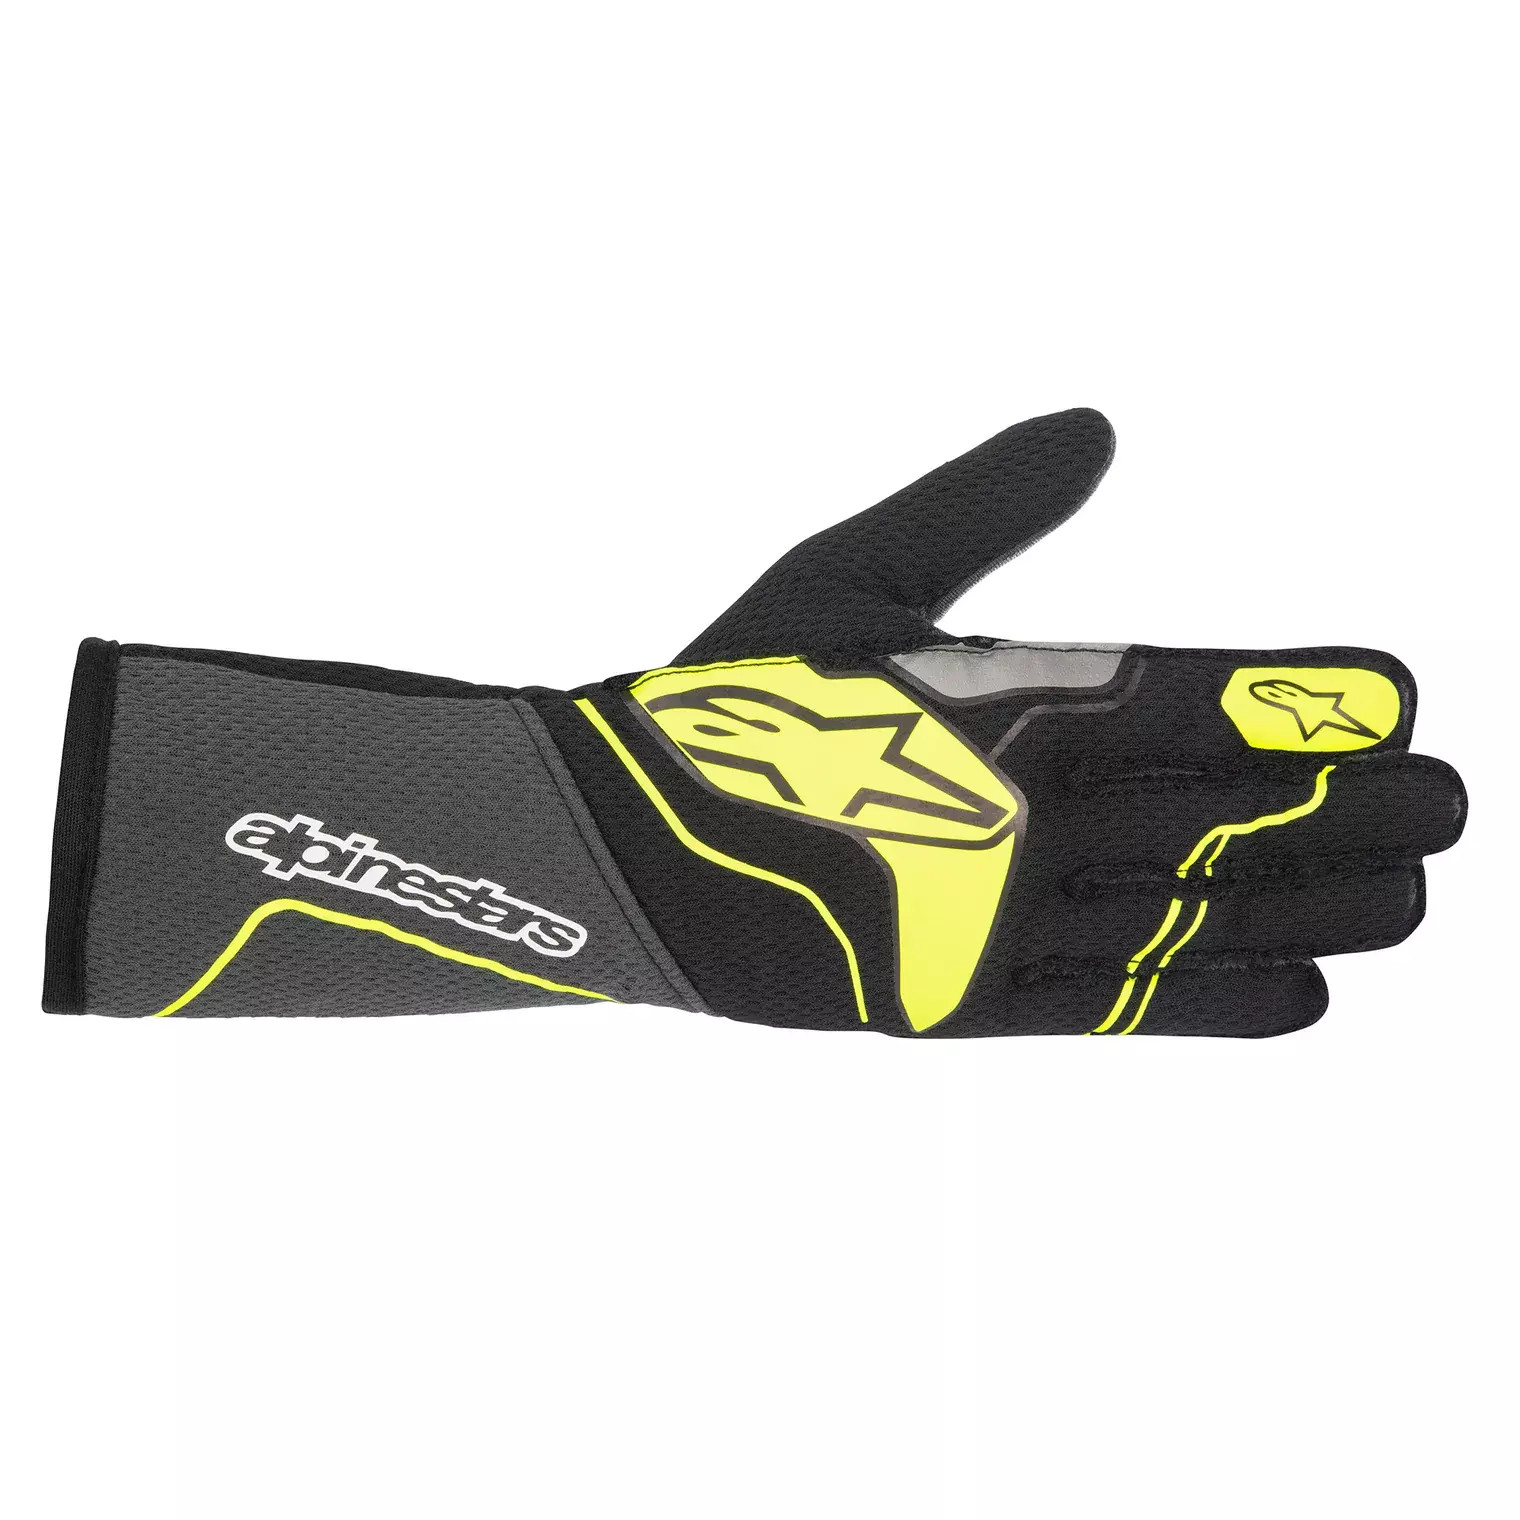 Gloves Tech 1-ZX Gray / Yellow Large - 3550323-9151-L